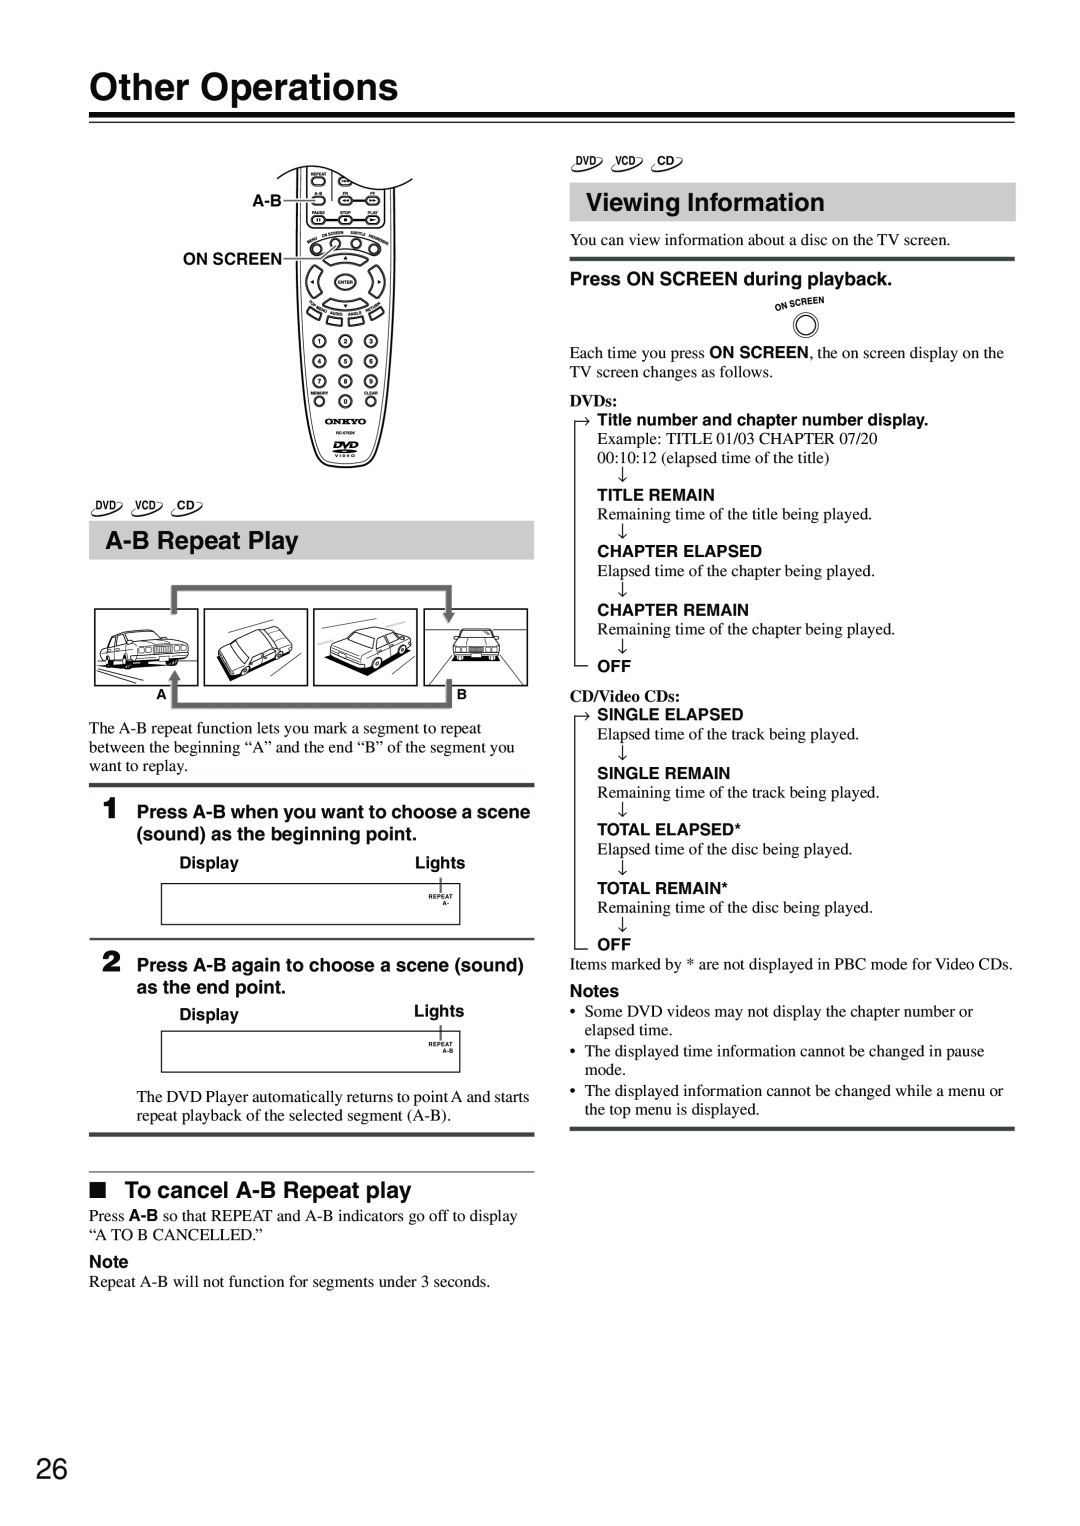 Onkyo DV-SP302 instruction manual A-B Repeat Play, Viewing Information, To cancel A-B Repeat play, Other Operations 